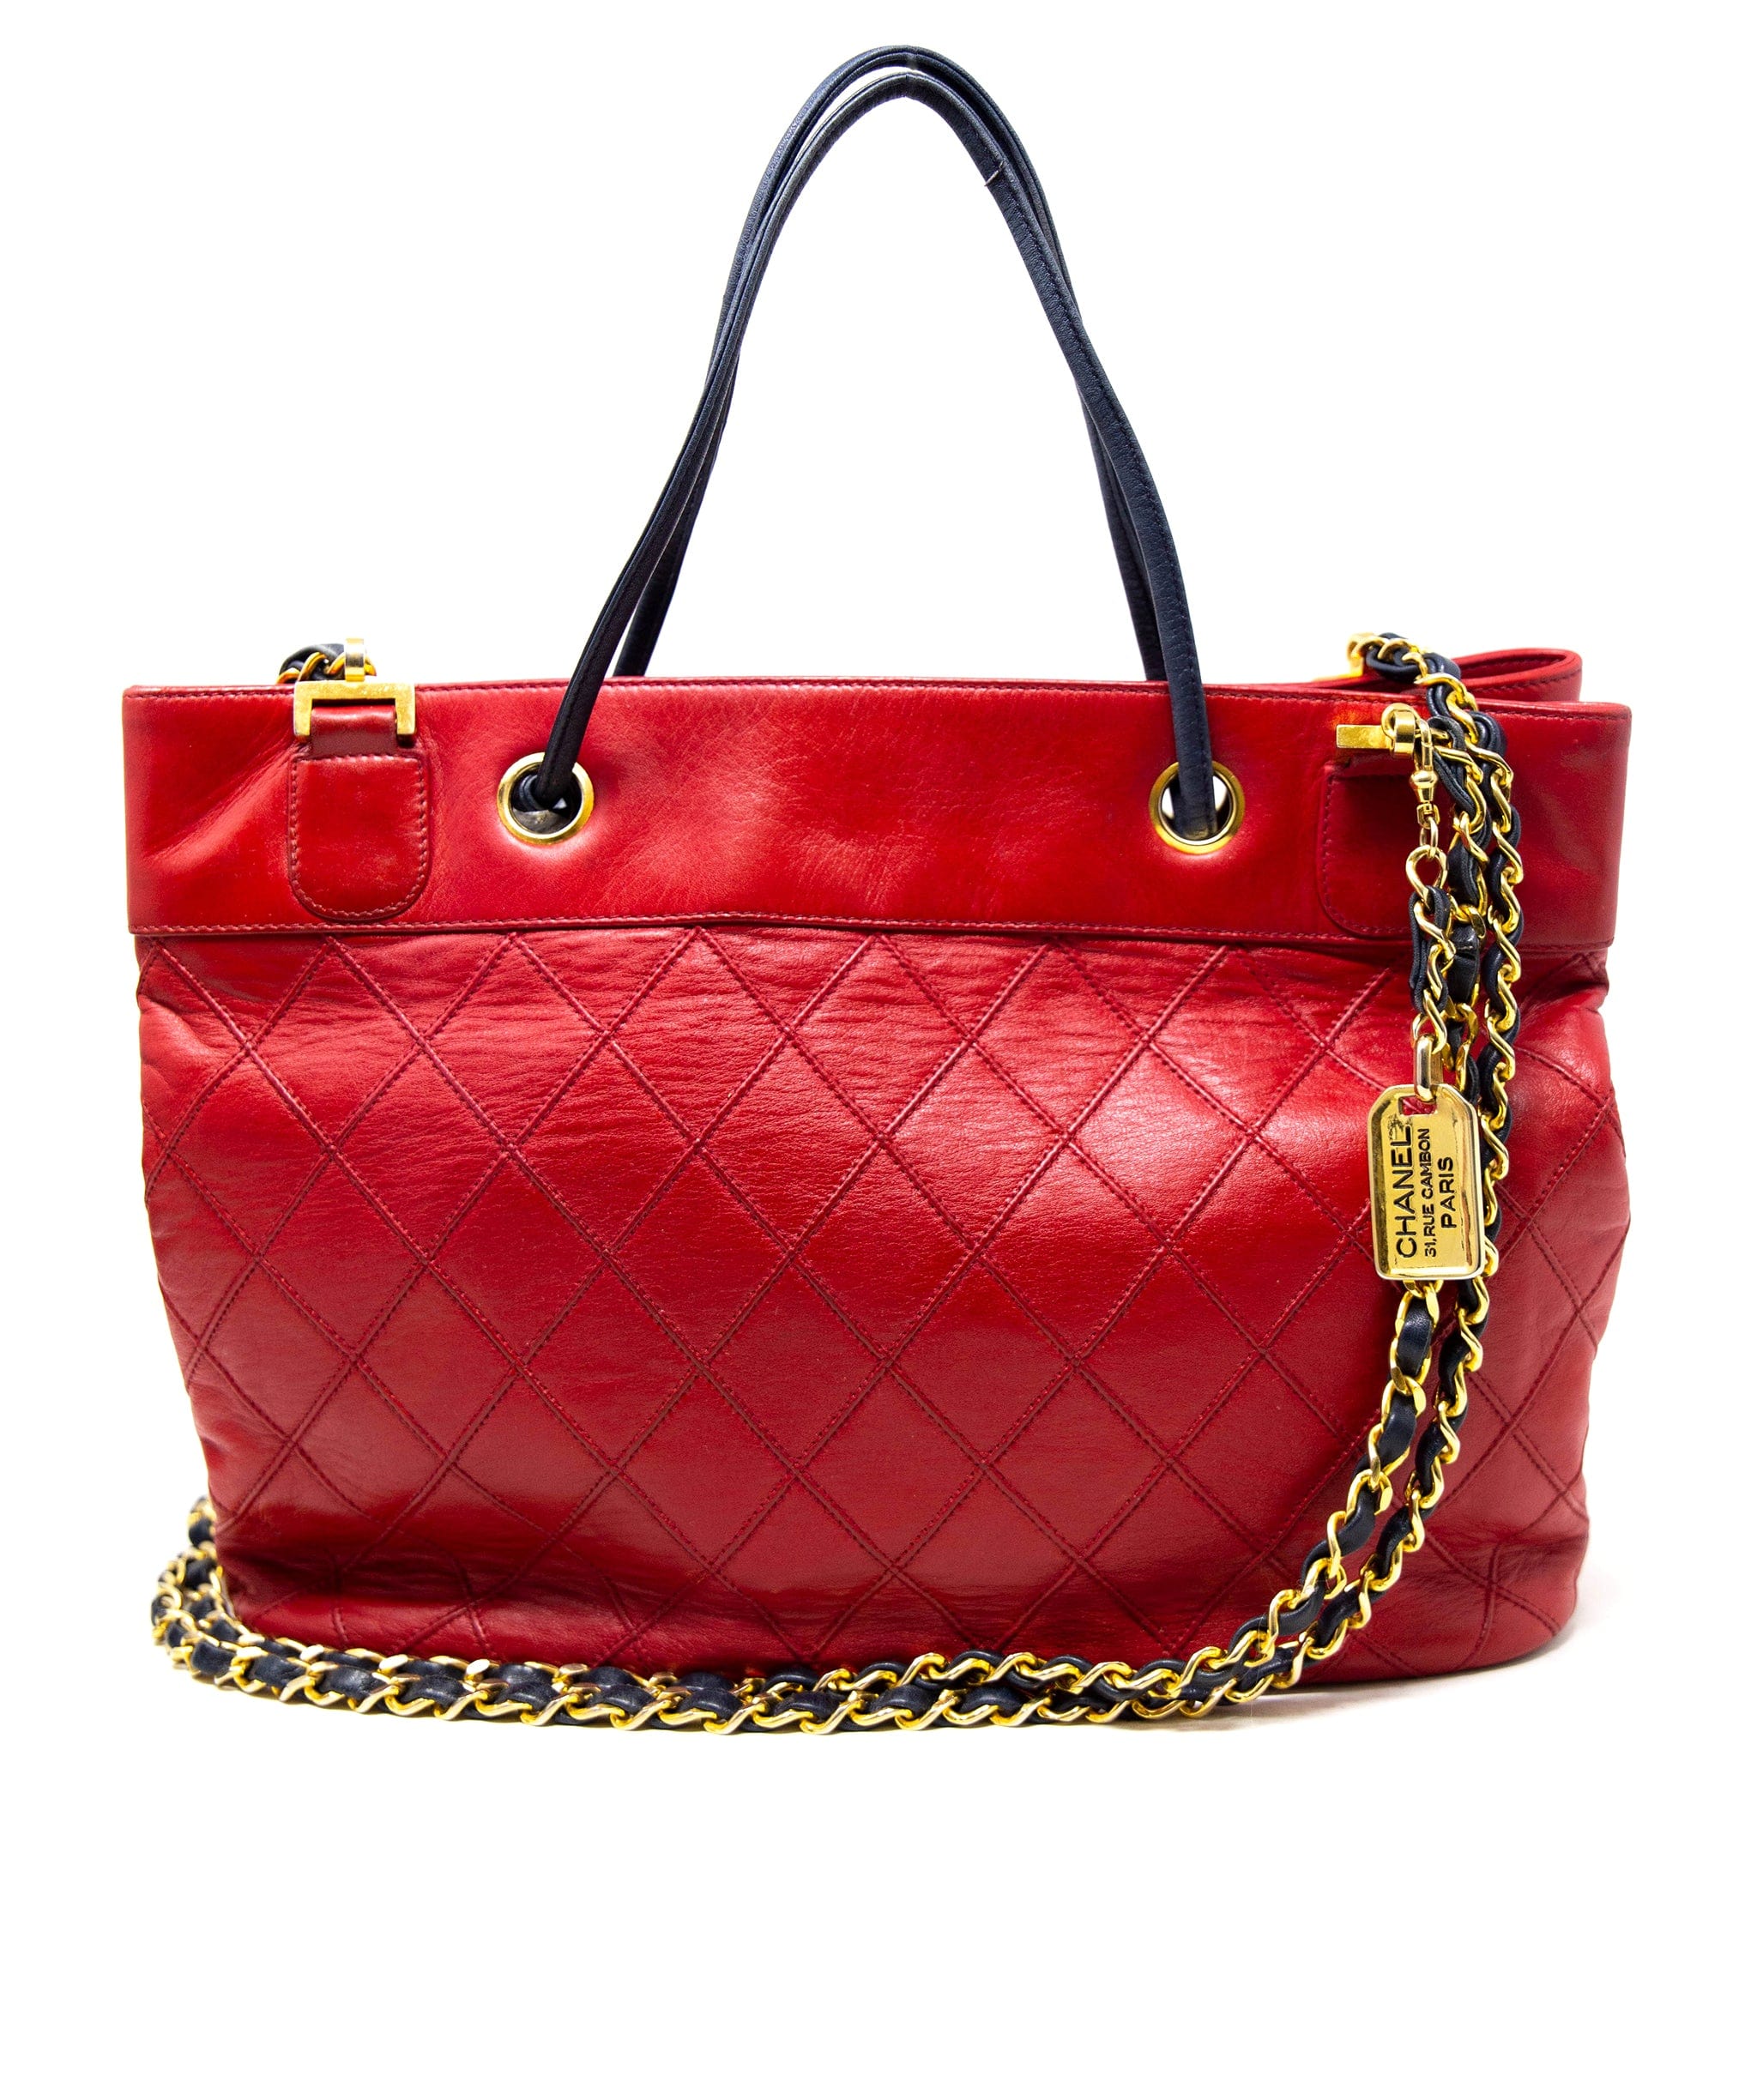 Chanel Chanel Vintage Red Tote bag with Drawstring Closure AWC1221